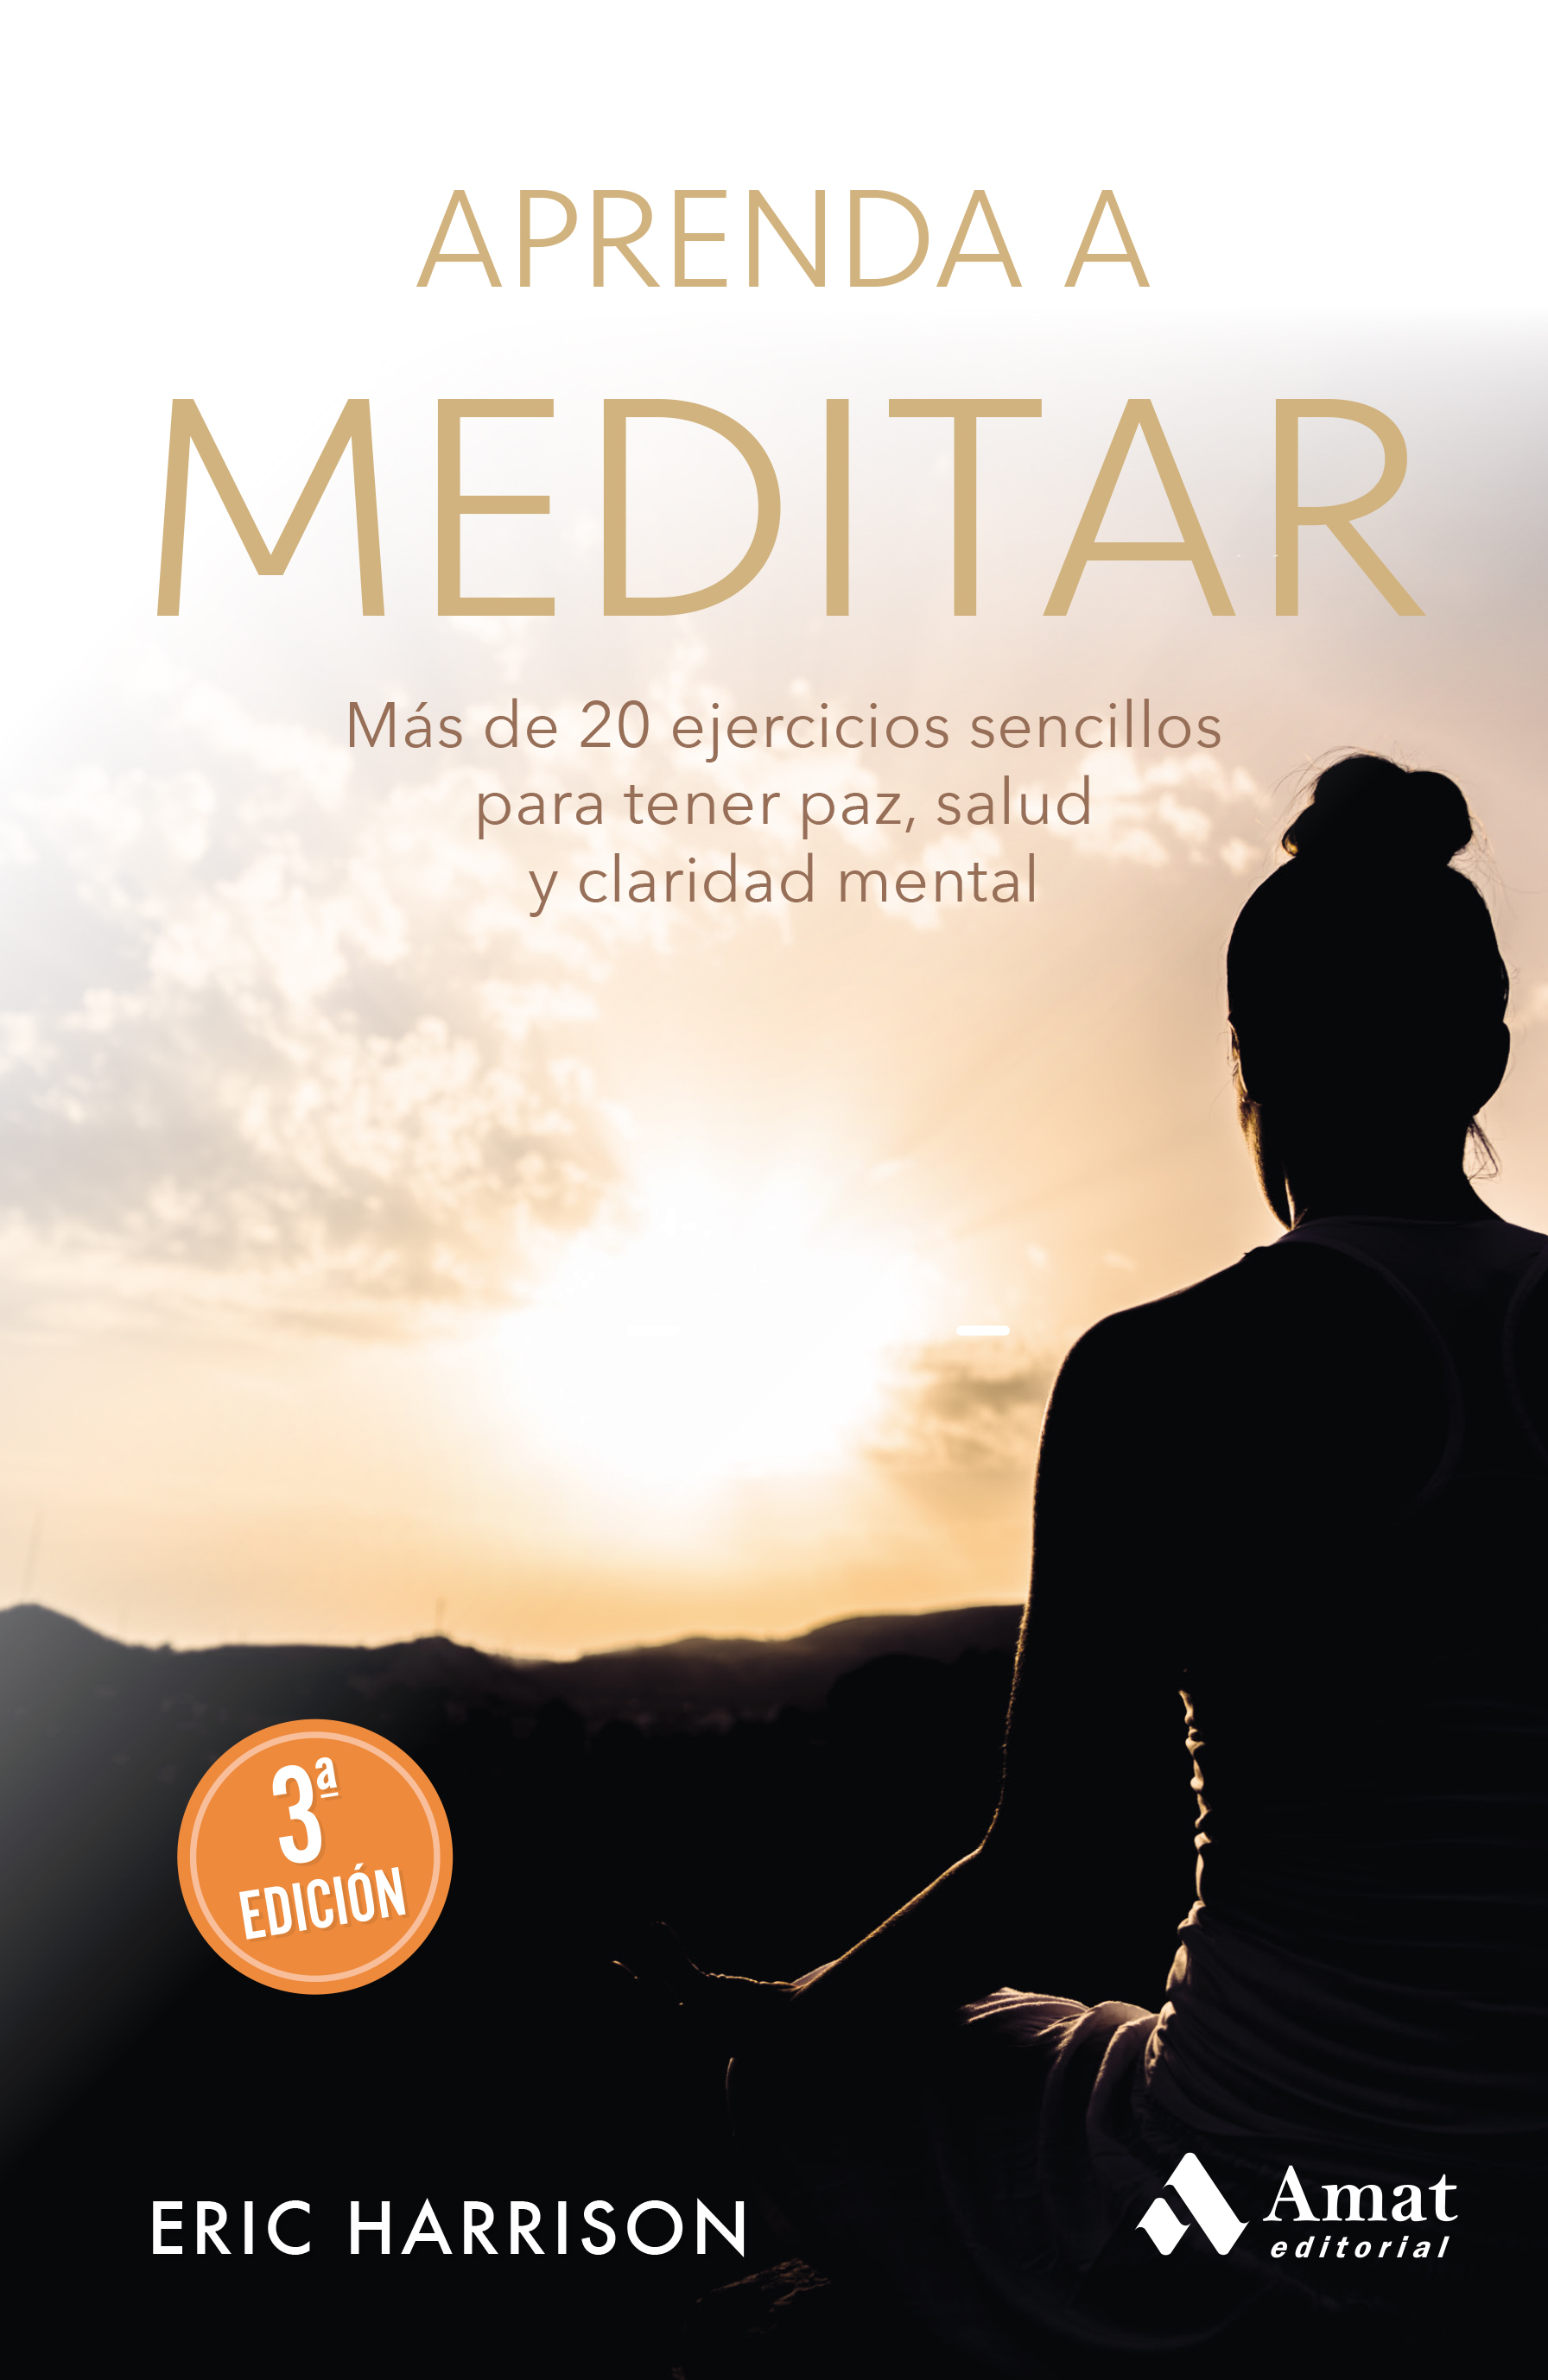 Learn to meditate: more than 20 simple exercises for peace, health and mental clarity by Eric Harrison